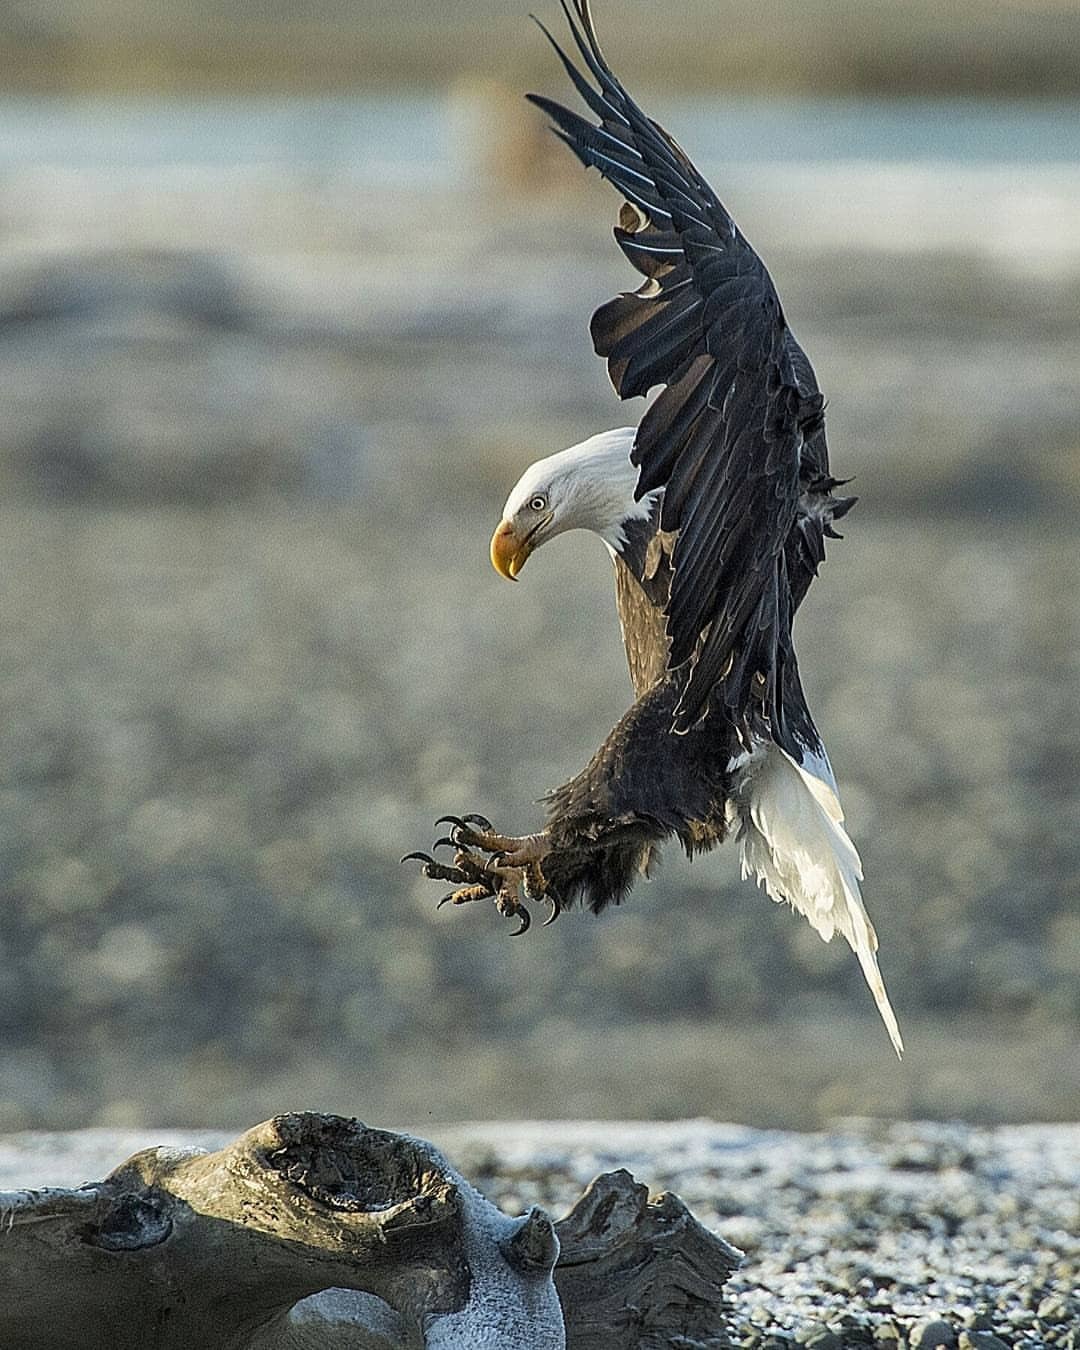 geographicwild:. Photography by © (Chris Desborough).Bald eagle using its full body